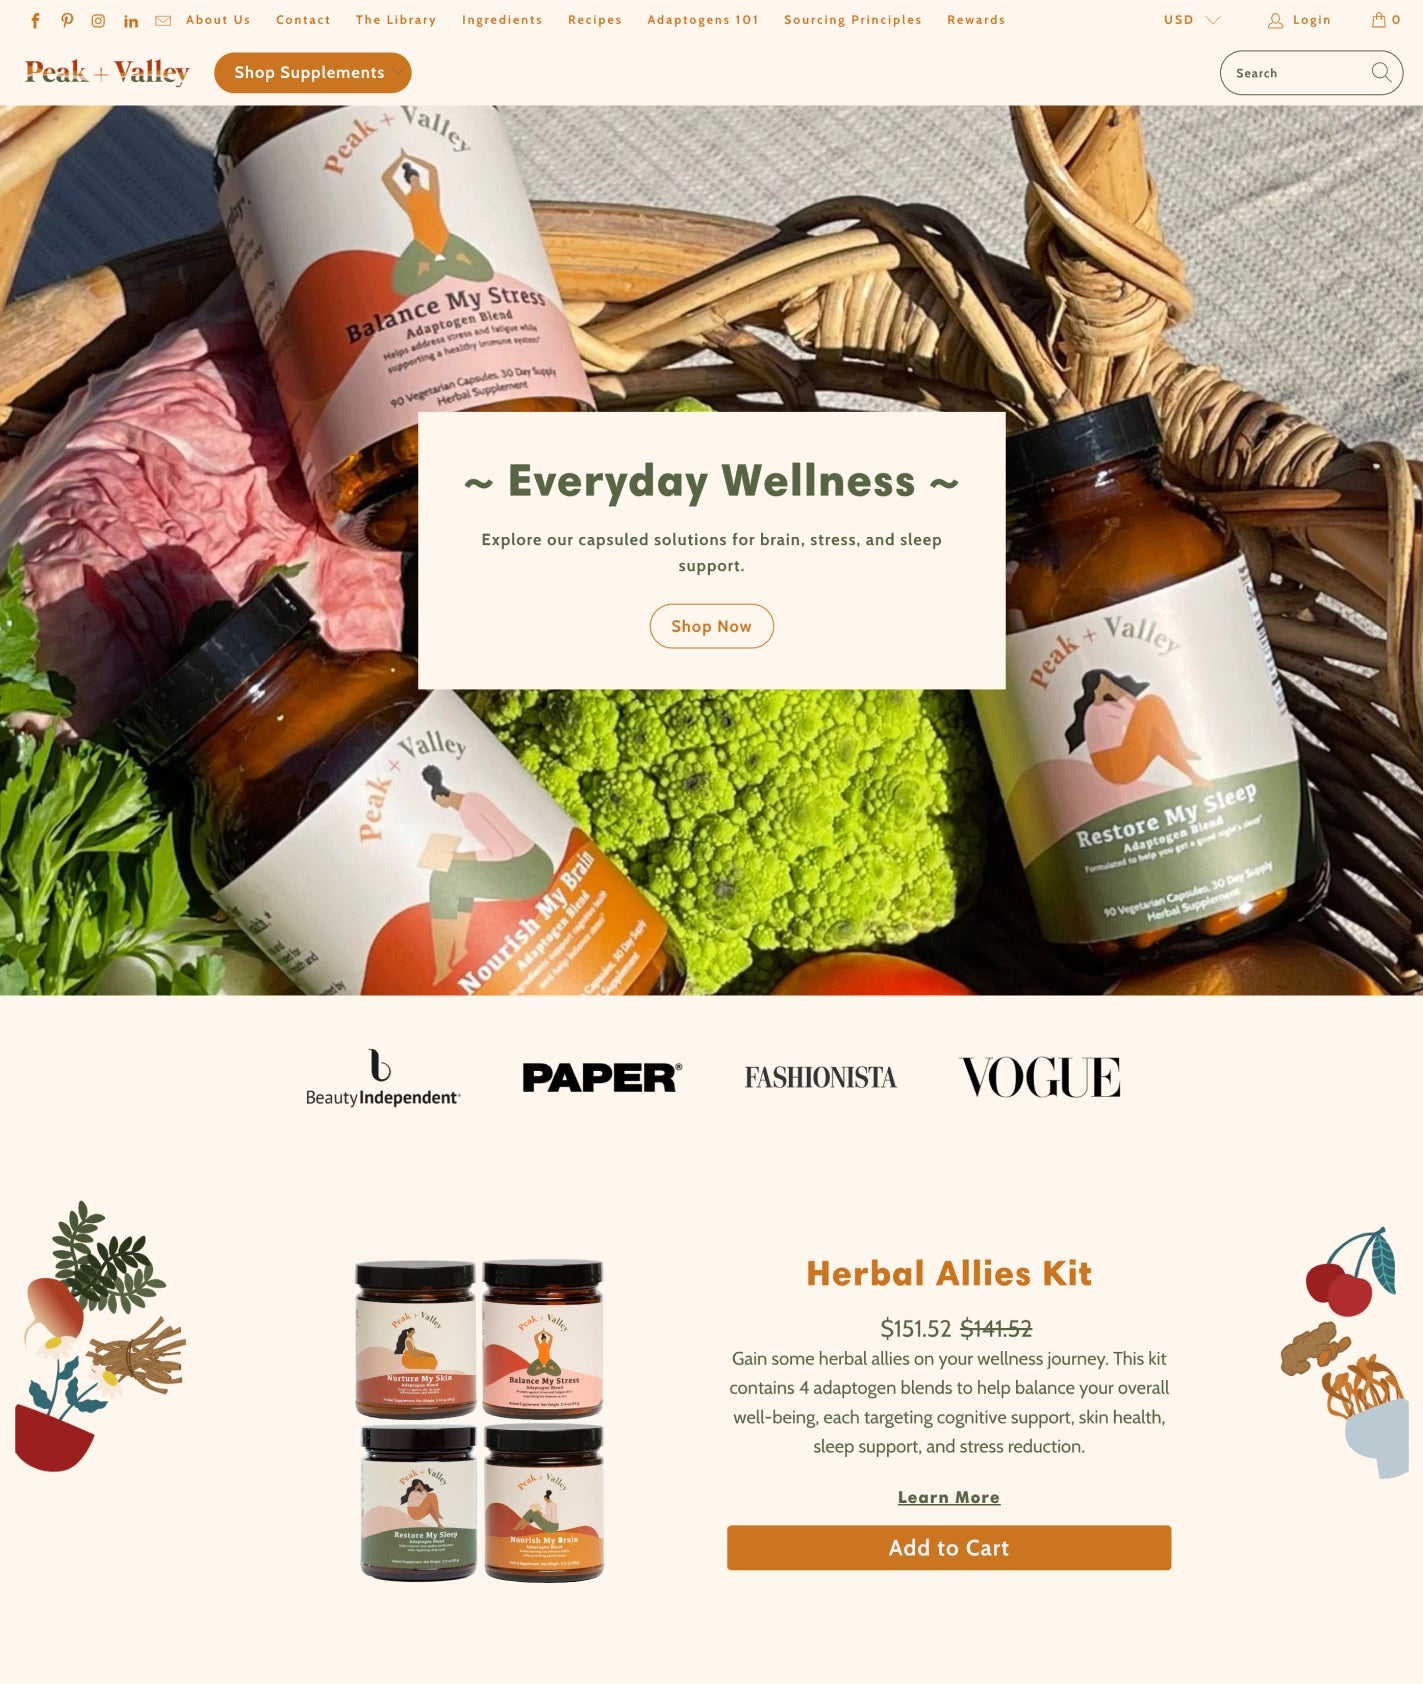 turbo shopify theme used by peak and valley shop